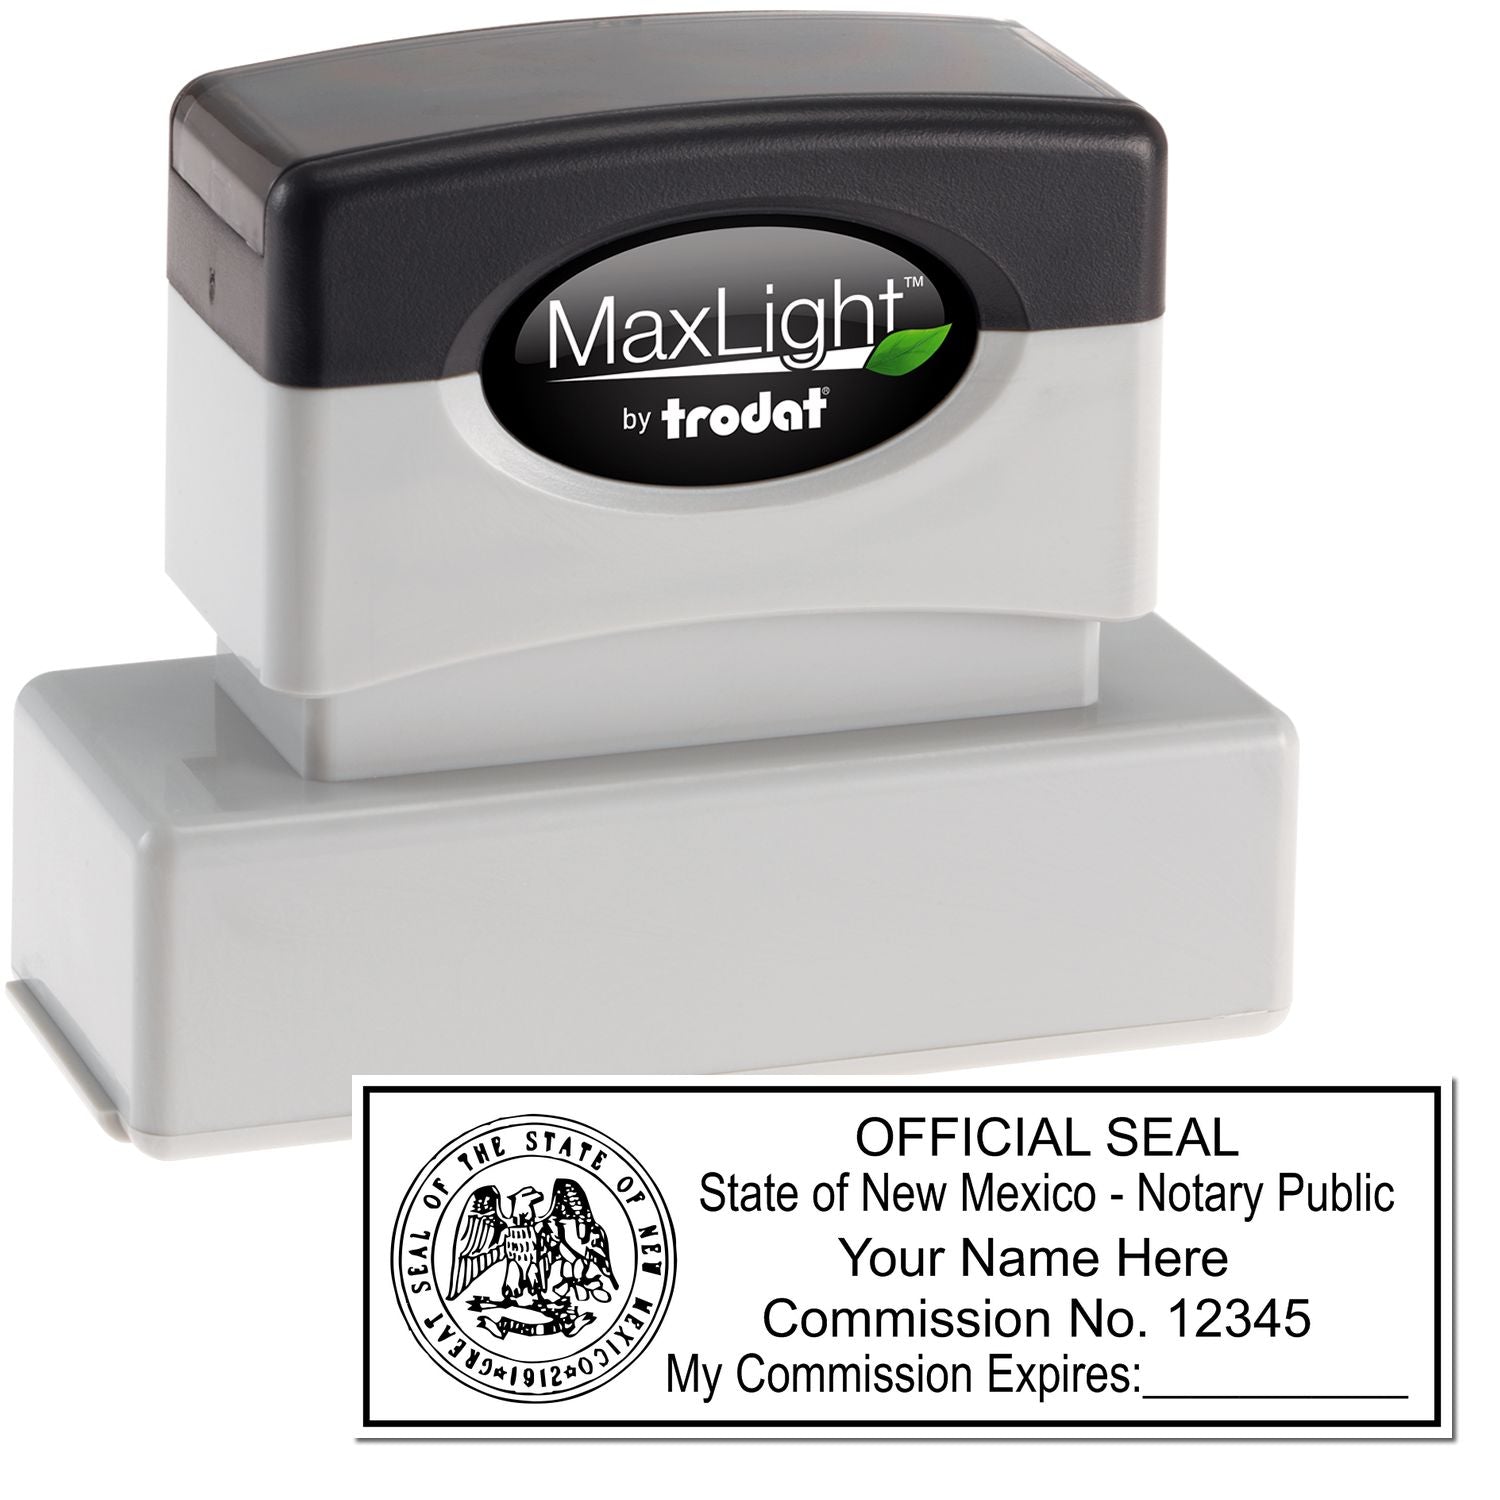 The main image for the MaxLight Premium Pre-Inked New Mexico State Seal Notarial Stamp depicting a sample of the imprint and electronic files